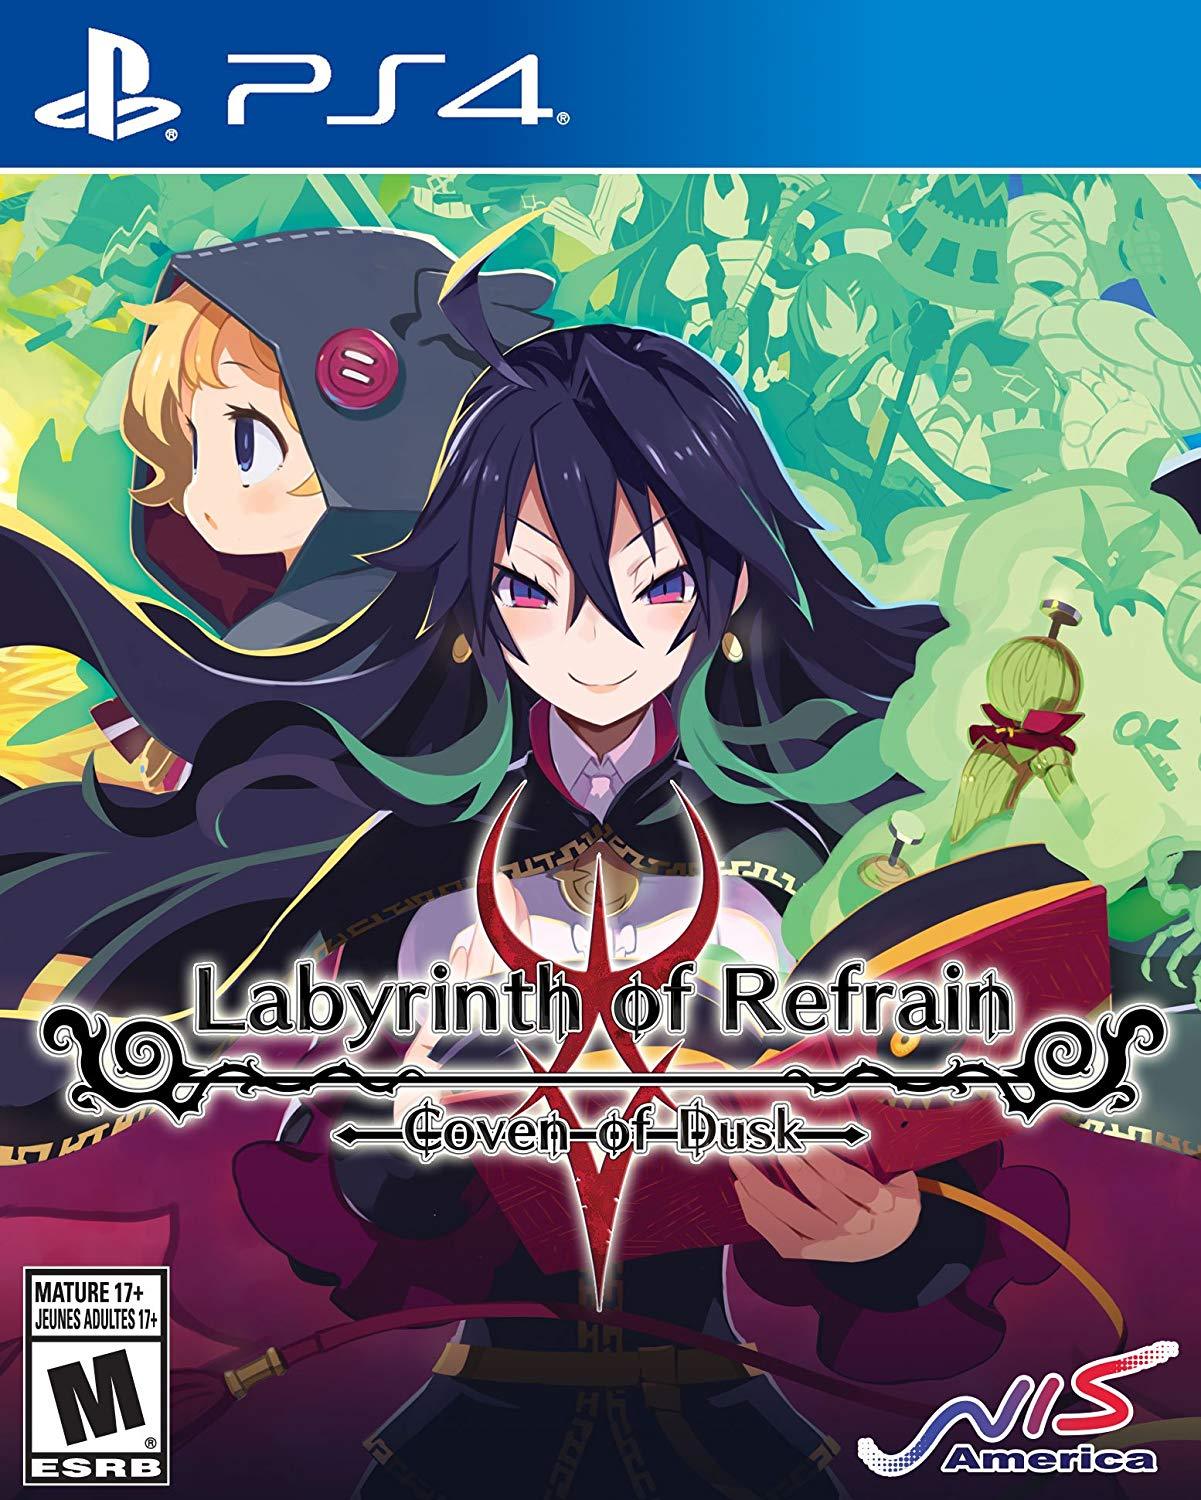 J2Games.com | Labyrinth of Refrain: Coven of Dusk (Playstation 4) (Brand New).